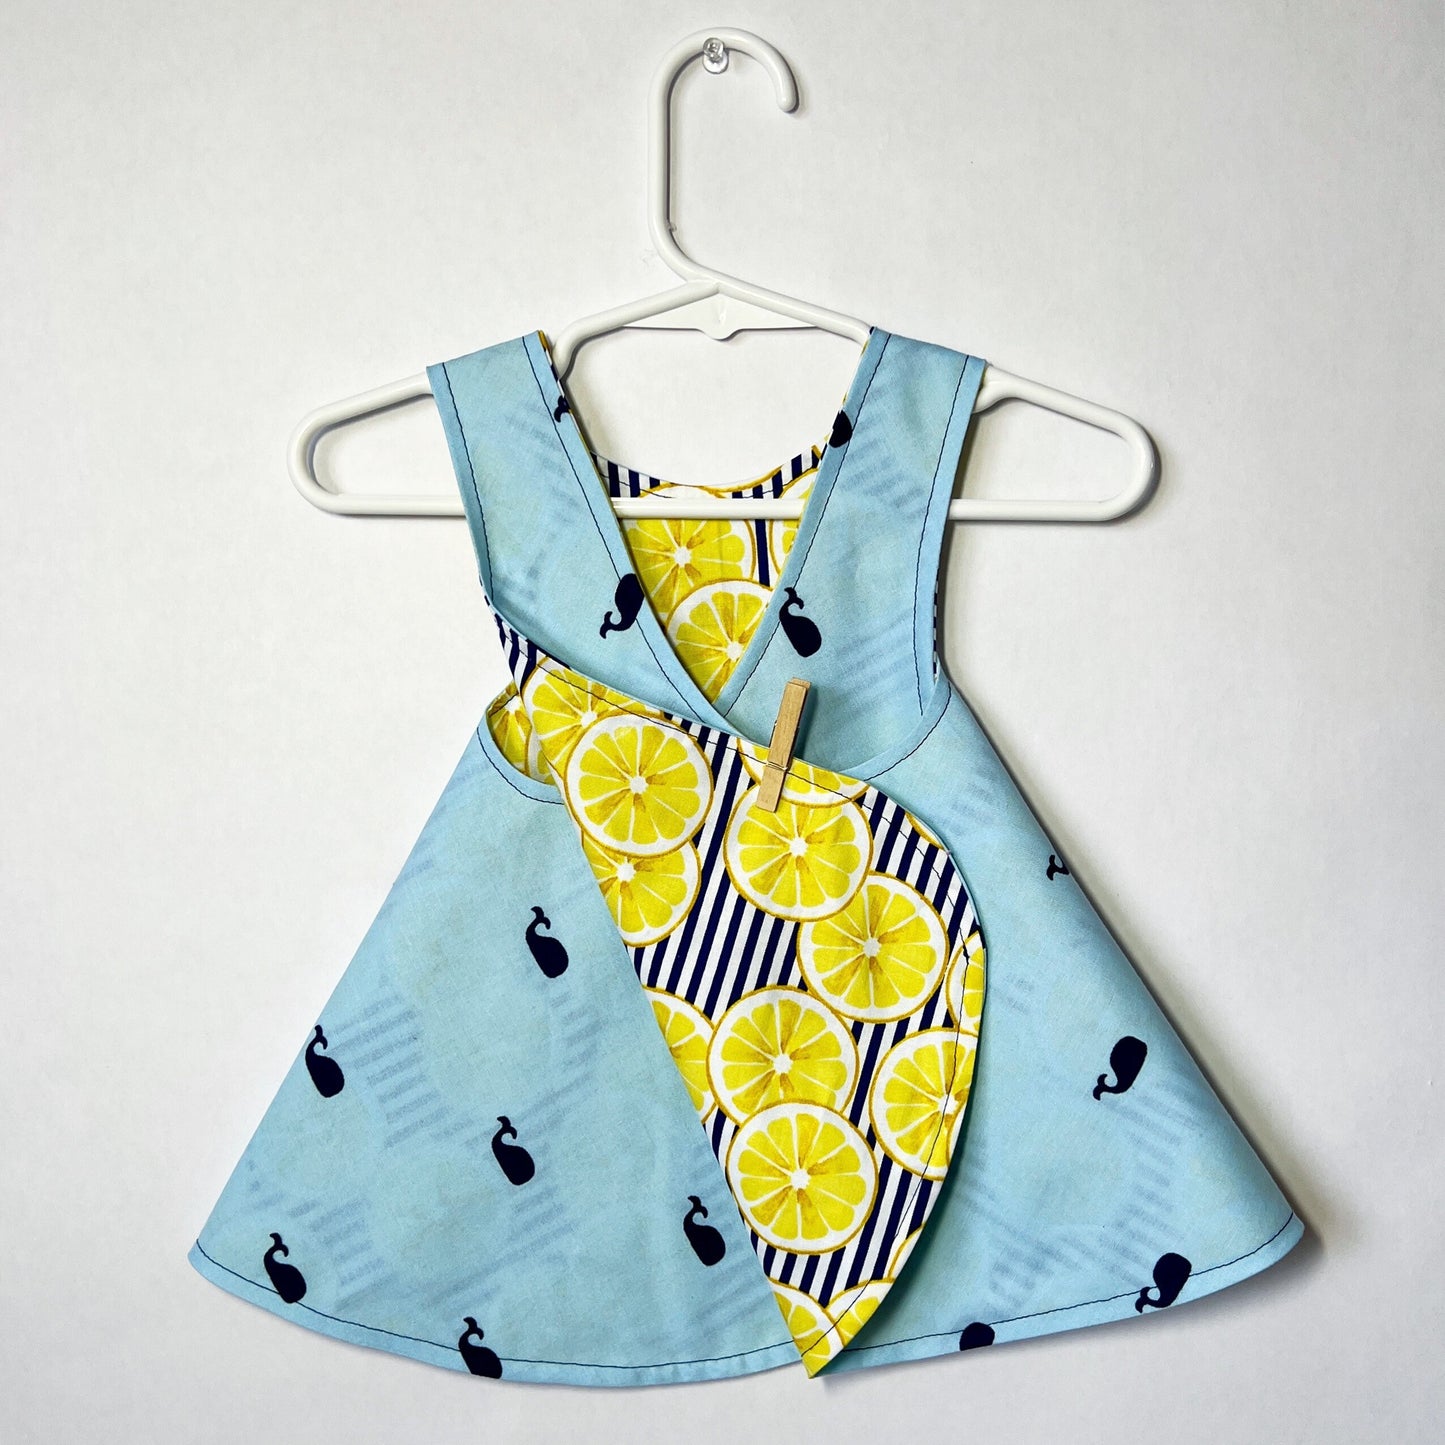 Reversible cotton dress "Whales and Lemons"